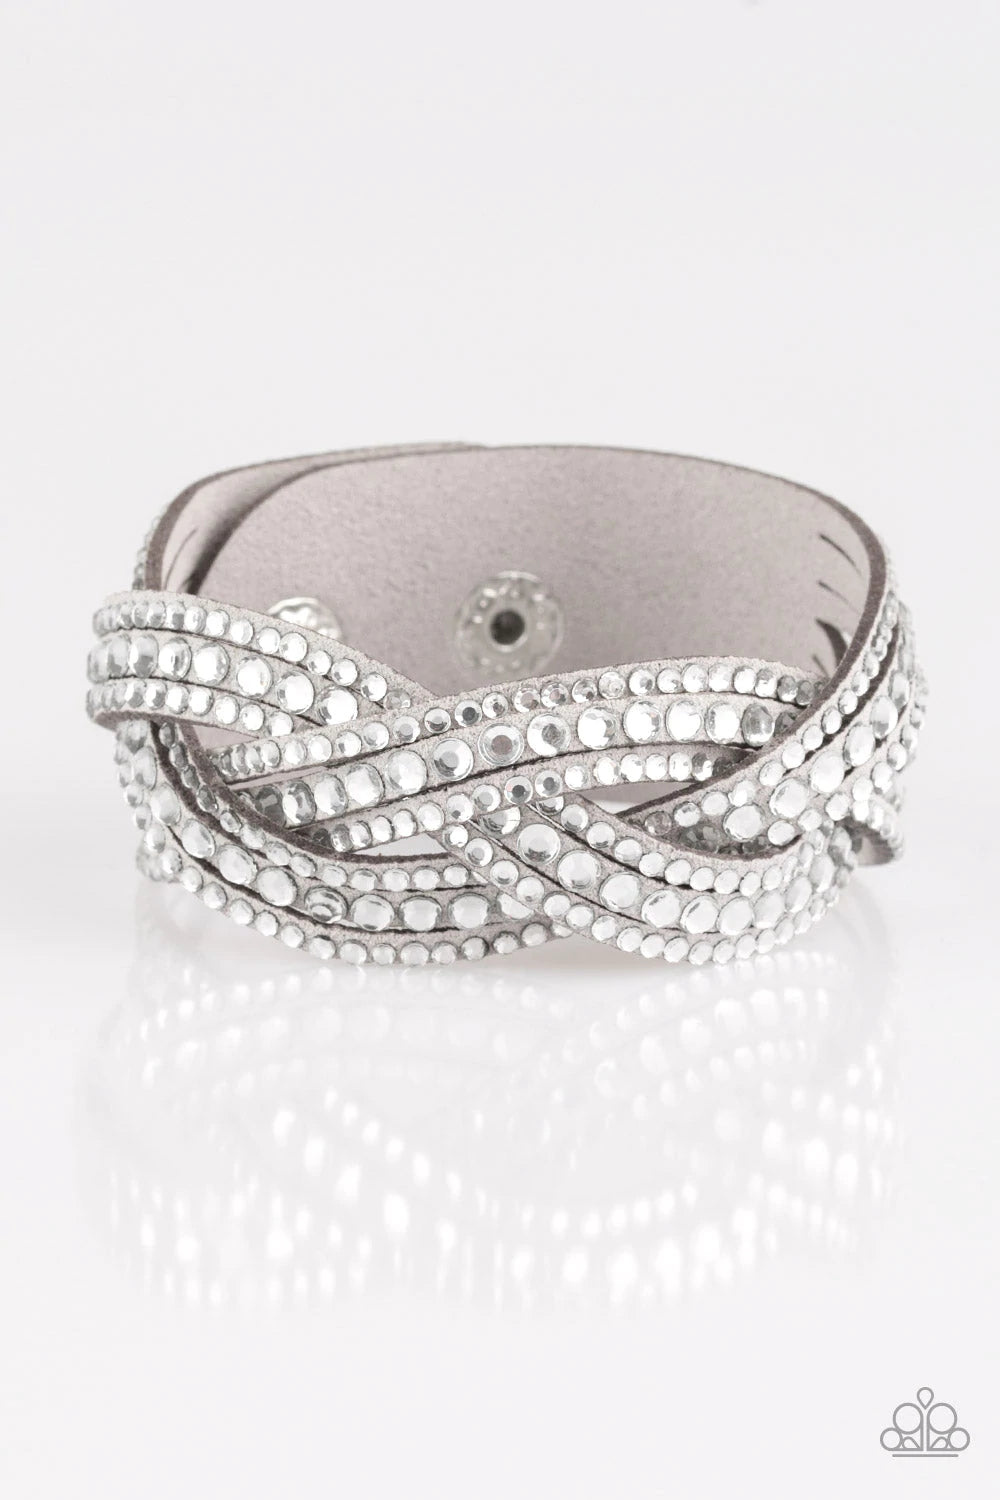 Paparazzi Accessories Bring on the Bling - Light Silver Varying in size, glassy white rhinestones are encrusted along interwoven gray suede bands, creating blinding shimmer across the wrist. Features an adjustable snap closure. Jewelry